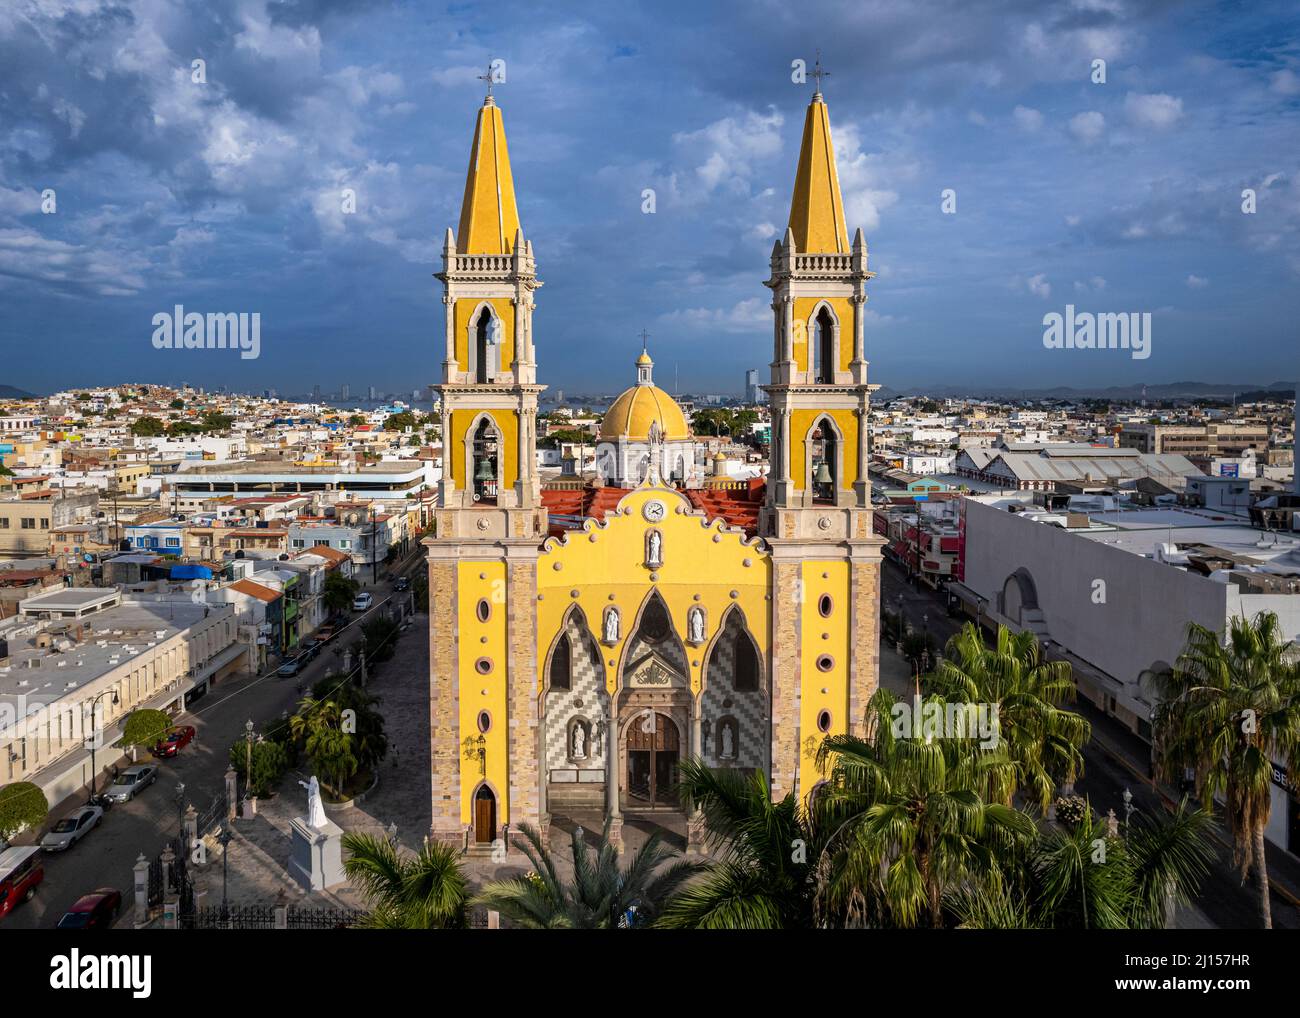 Basilica of the Immaculate Conception, the colorful main cathedral of the Pacific resort city Mazatlan, Sinaloa, Mexico. Stock Photo